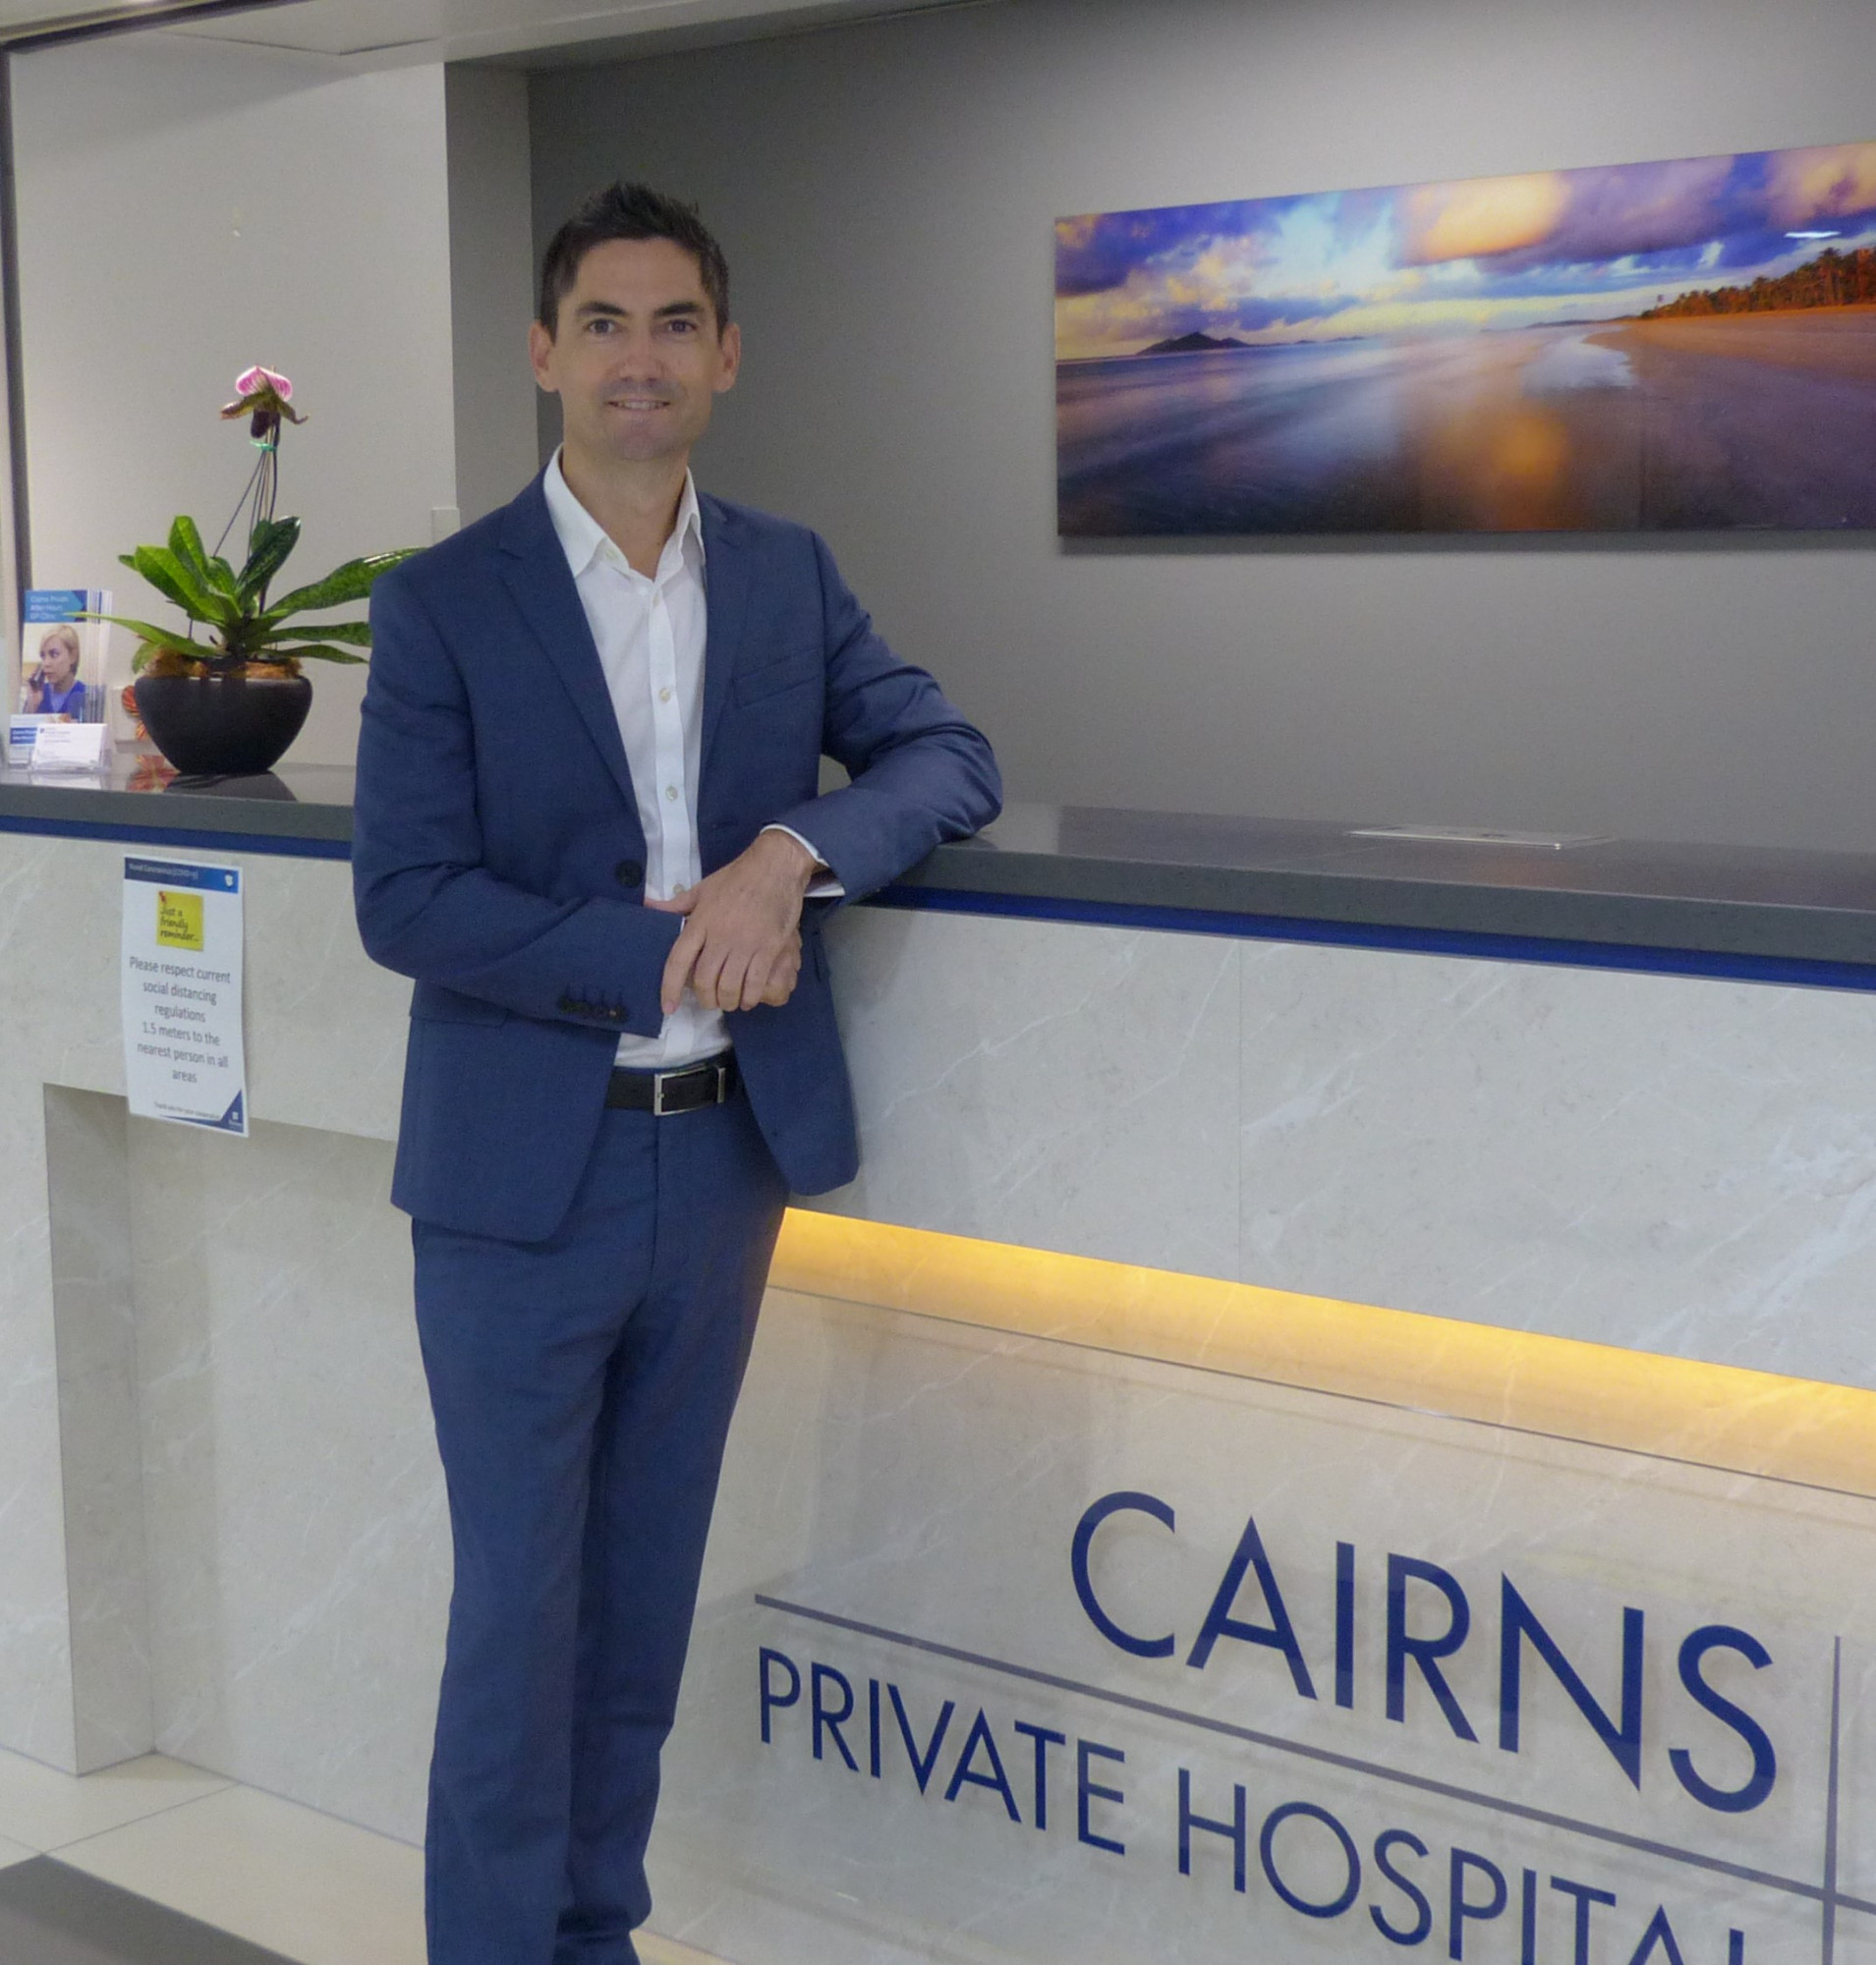 Cairns Private Hospital Chief Executive Officer Ben Tooth